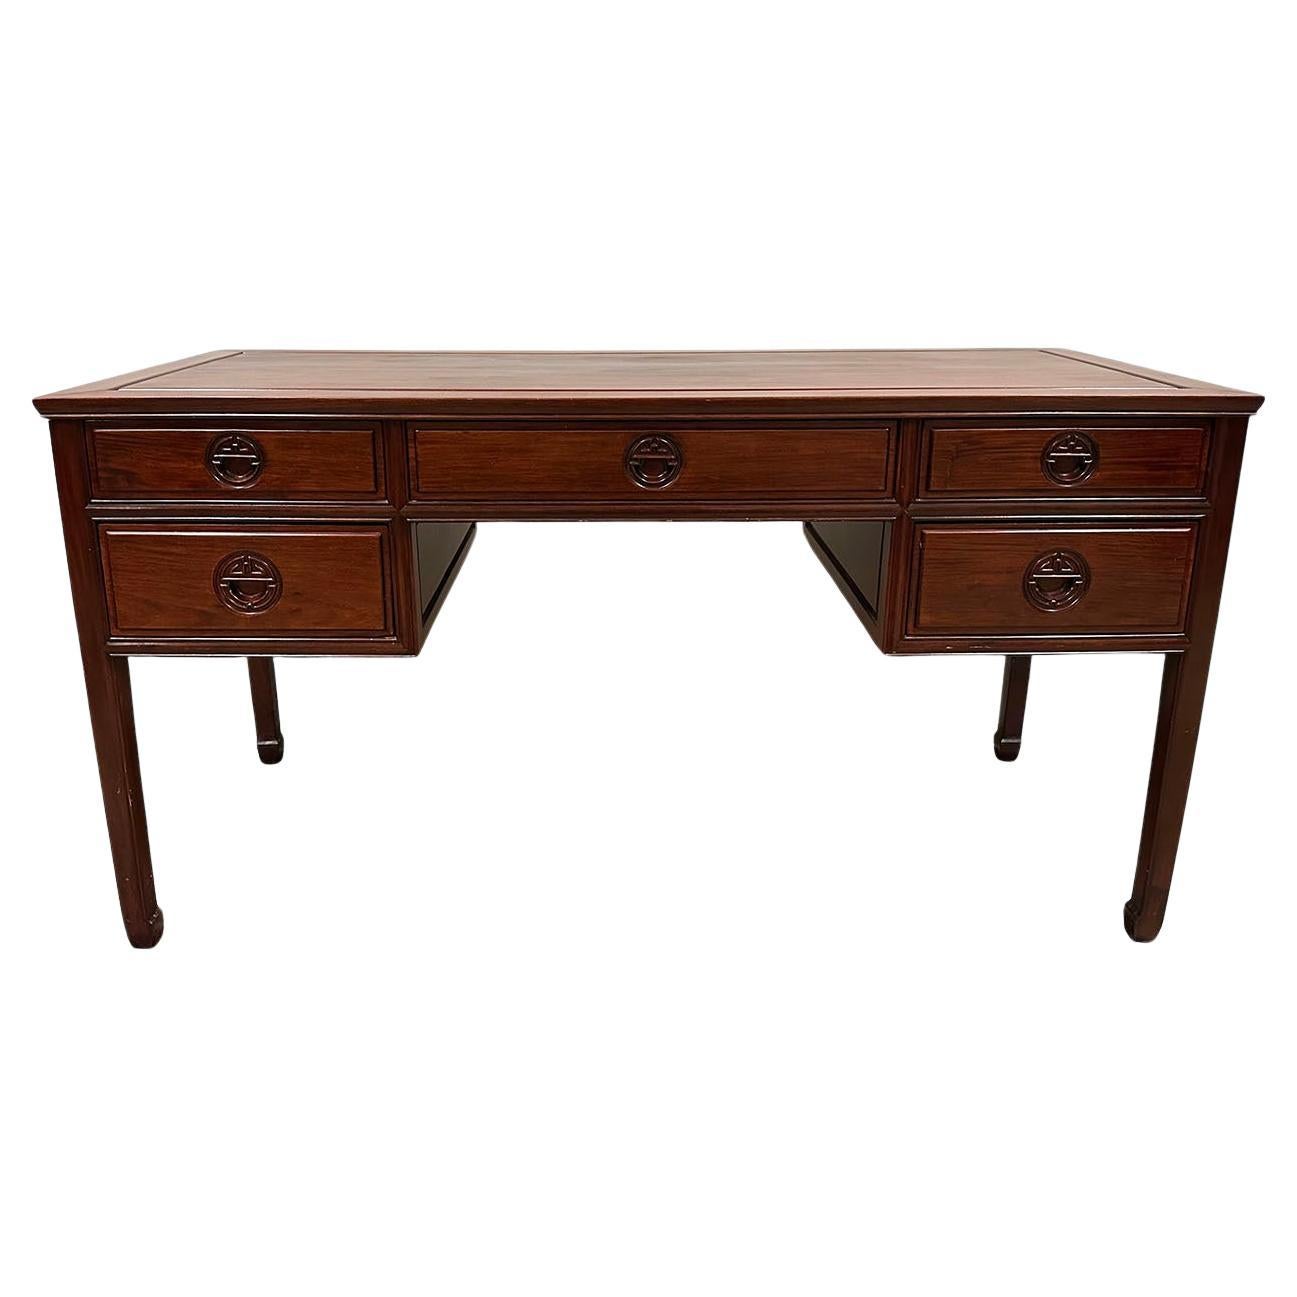 Mid 20th Century Vintage Chinese Carved Rosewood Writing Desk For Sale